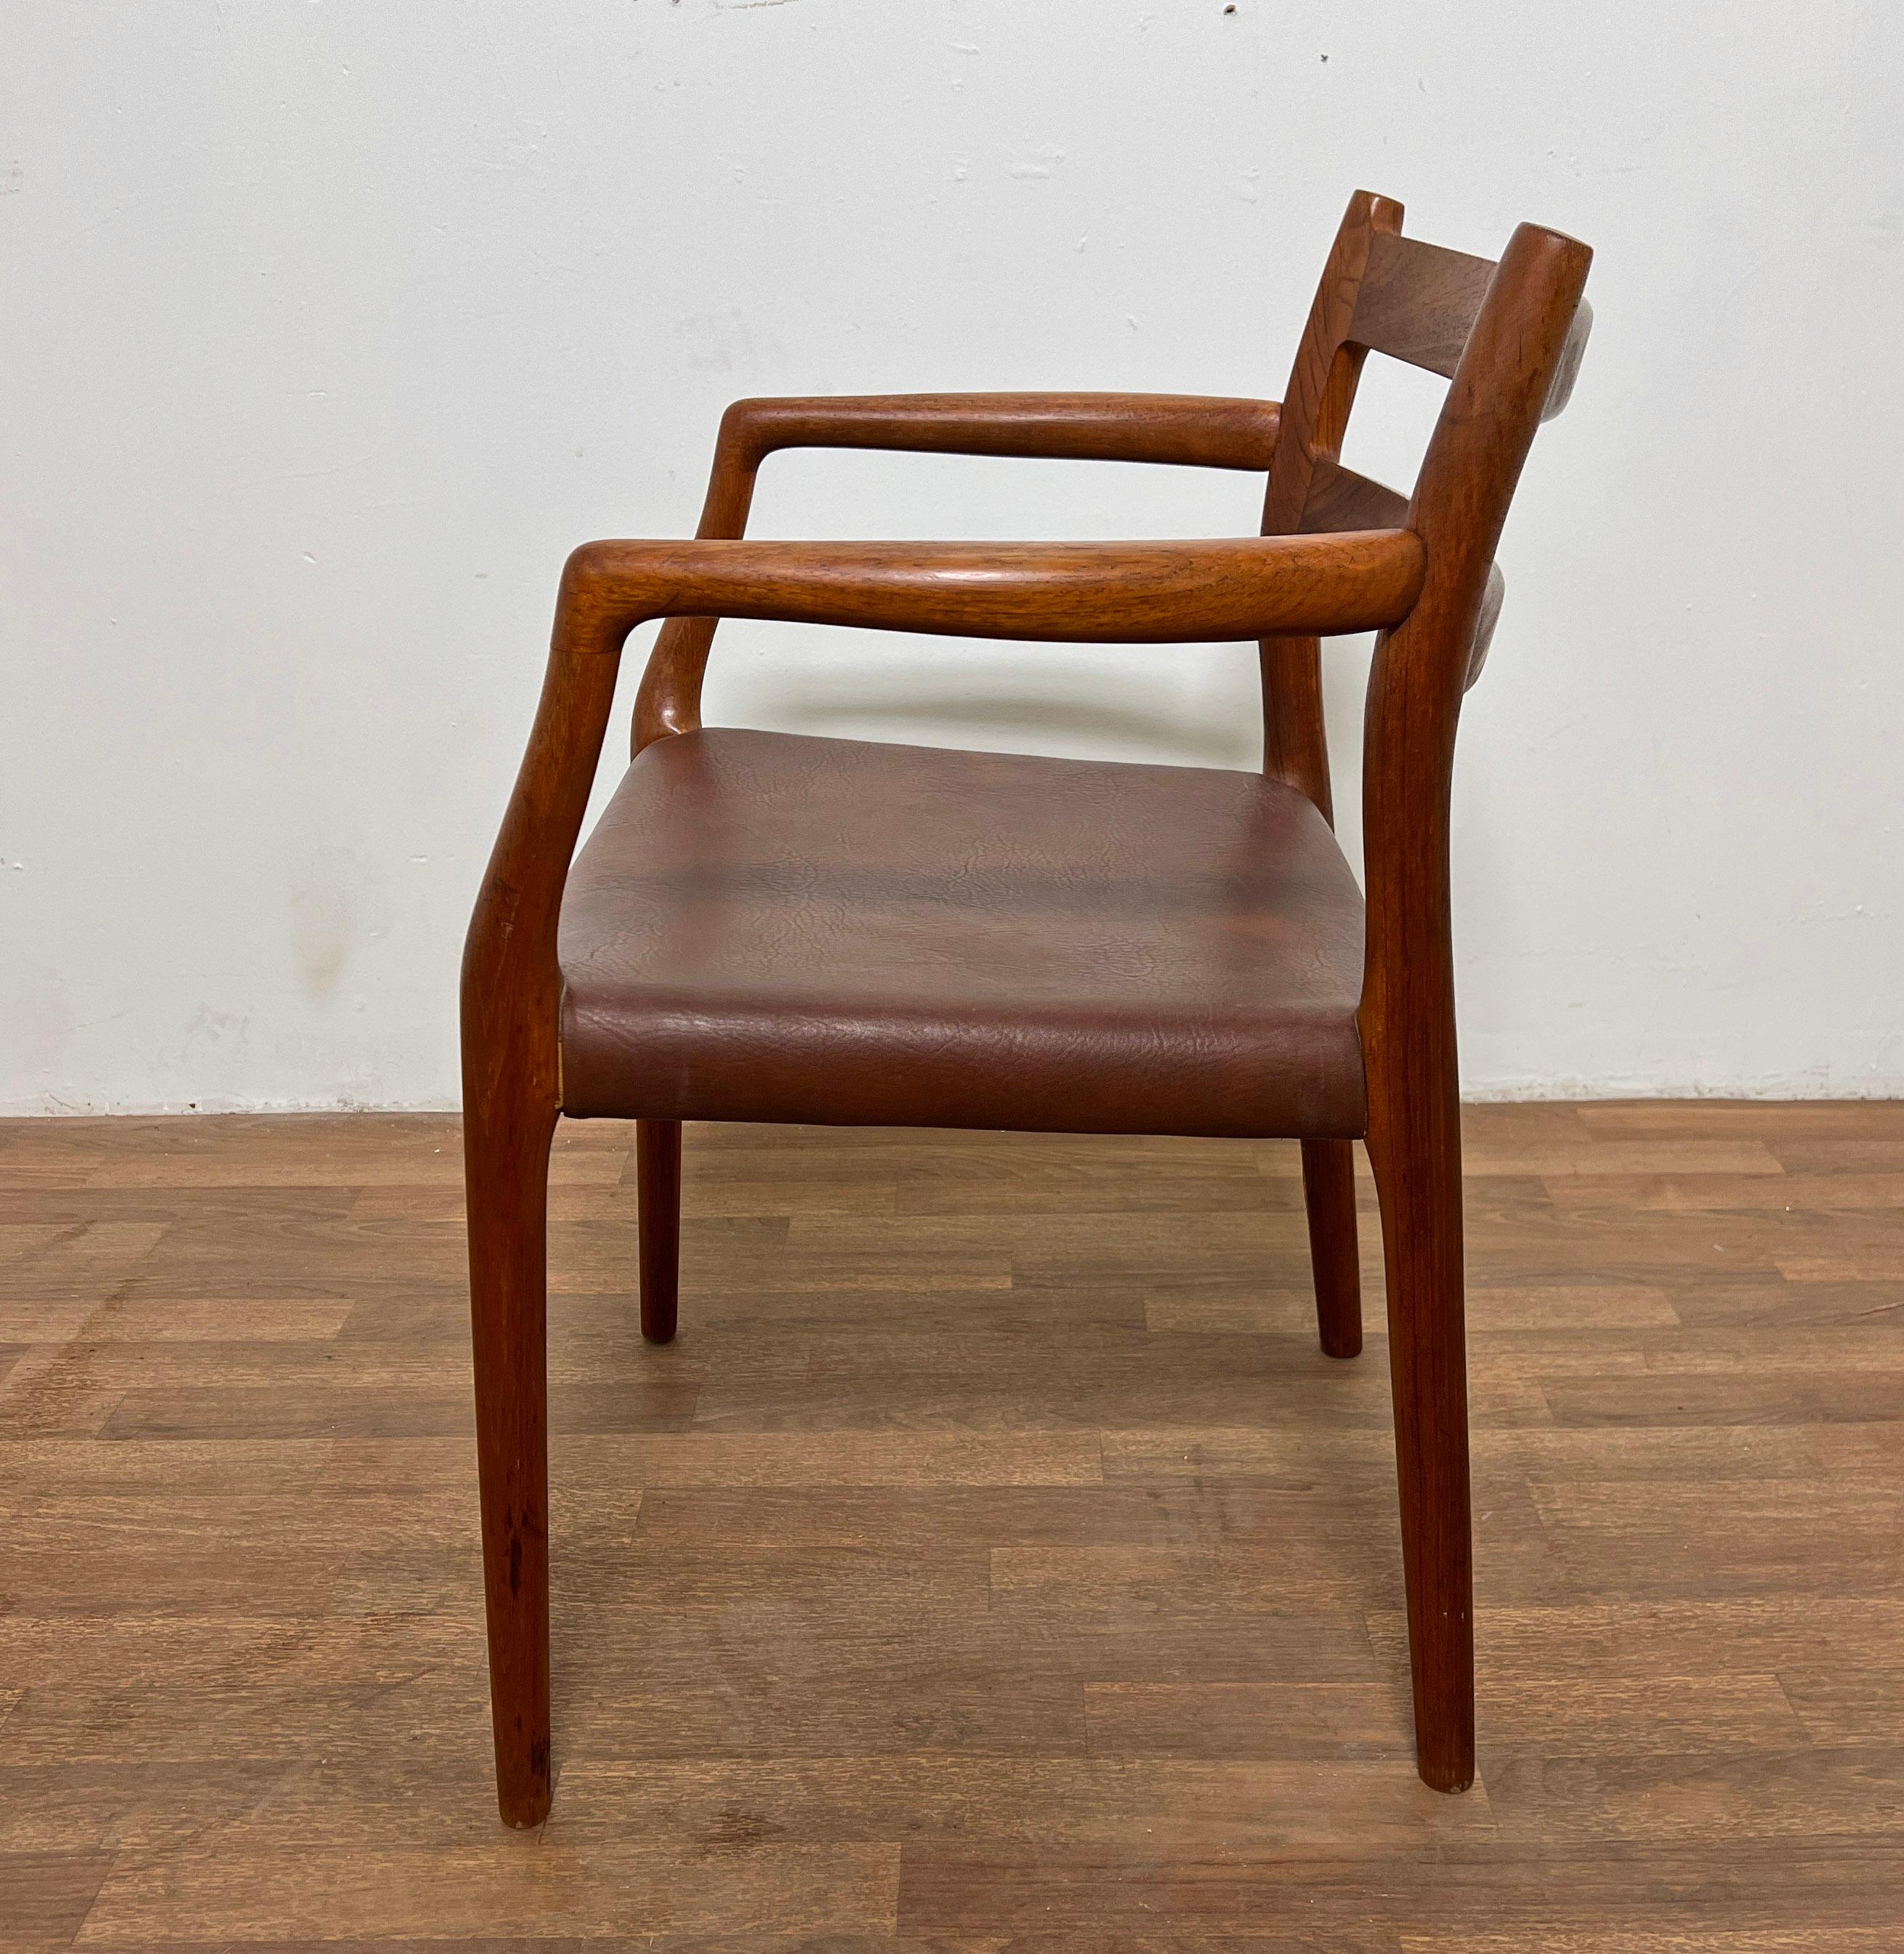 A model 67 arm chair in teak with leather seat, designed by Niels O. Moller for J.L. Moller, Denmark, circa 1970s.